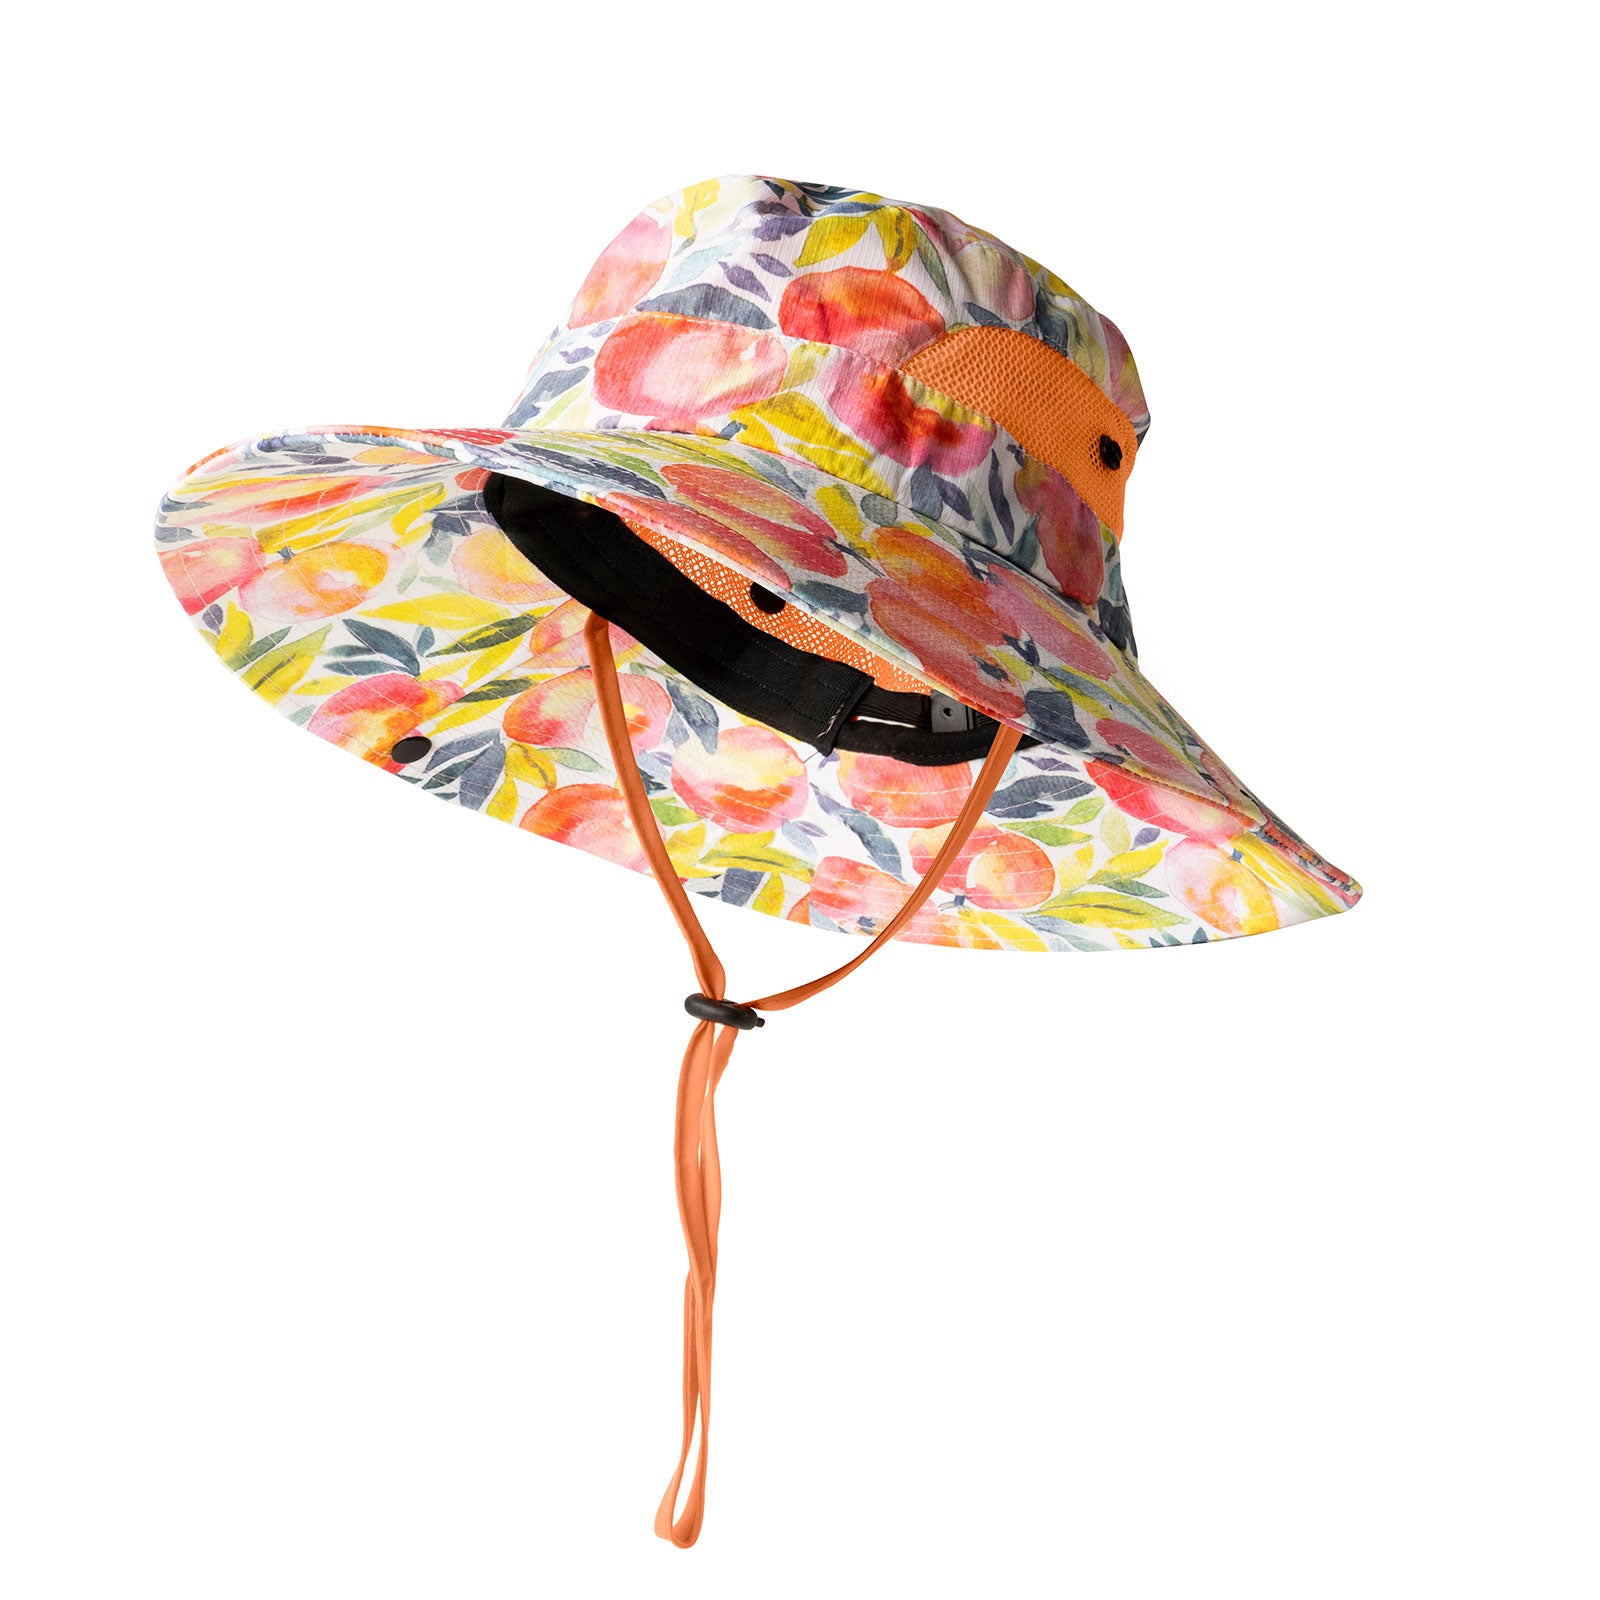 garden hat - straw hat purchase Reference : 6587